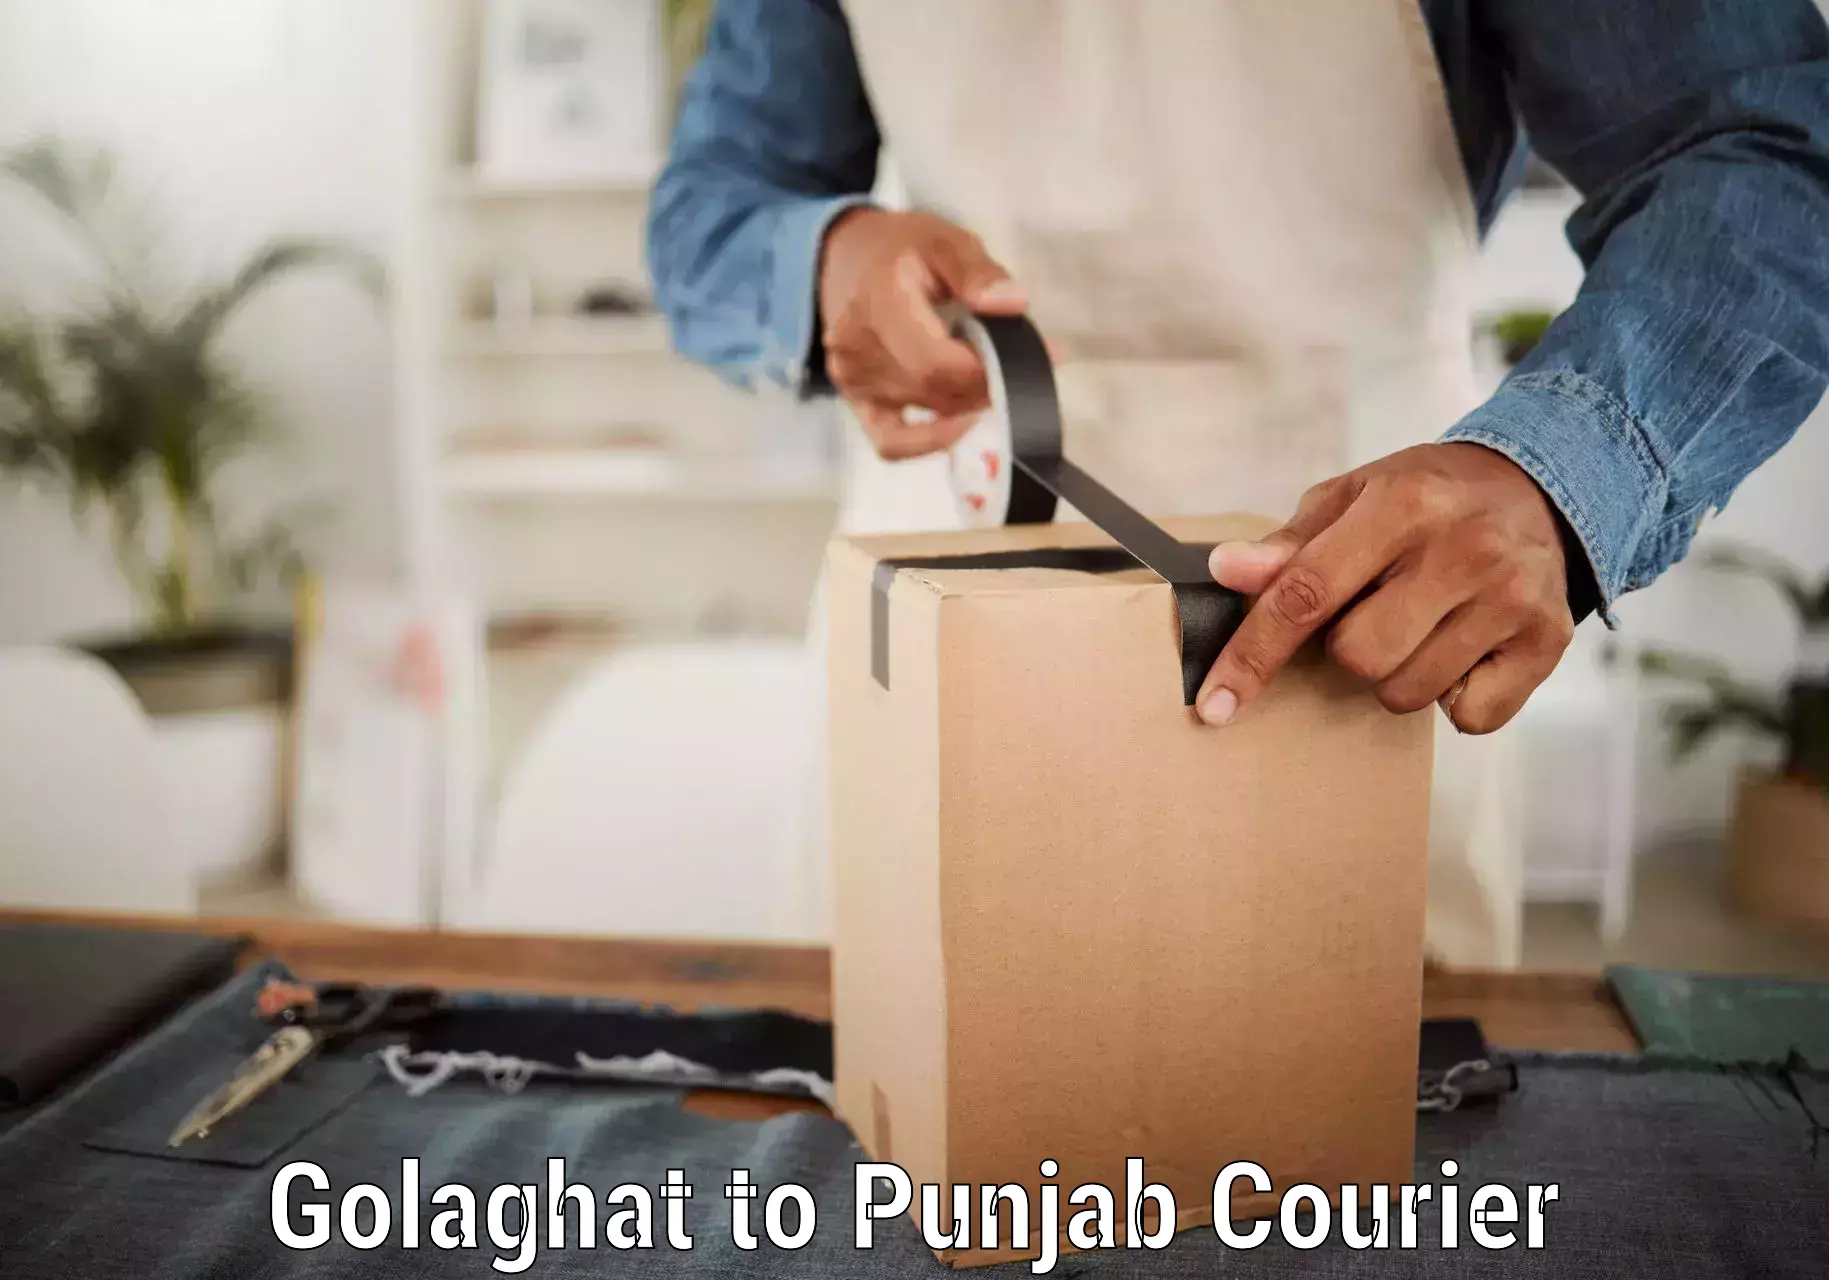 Lightweight parcel options Golaghat to Nangal